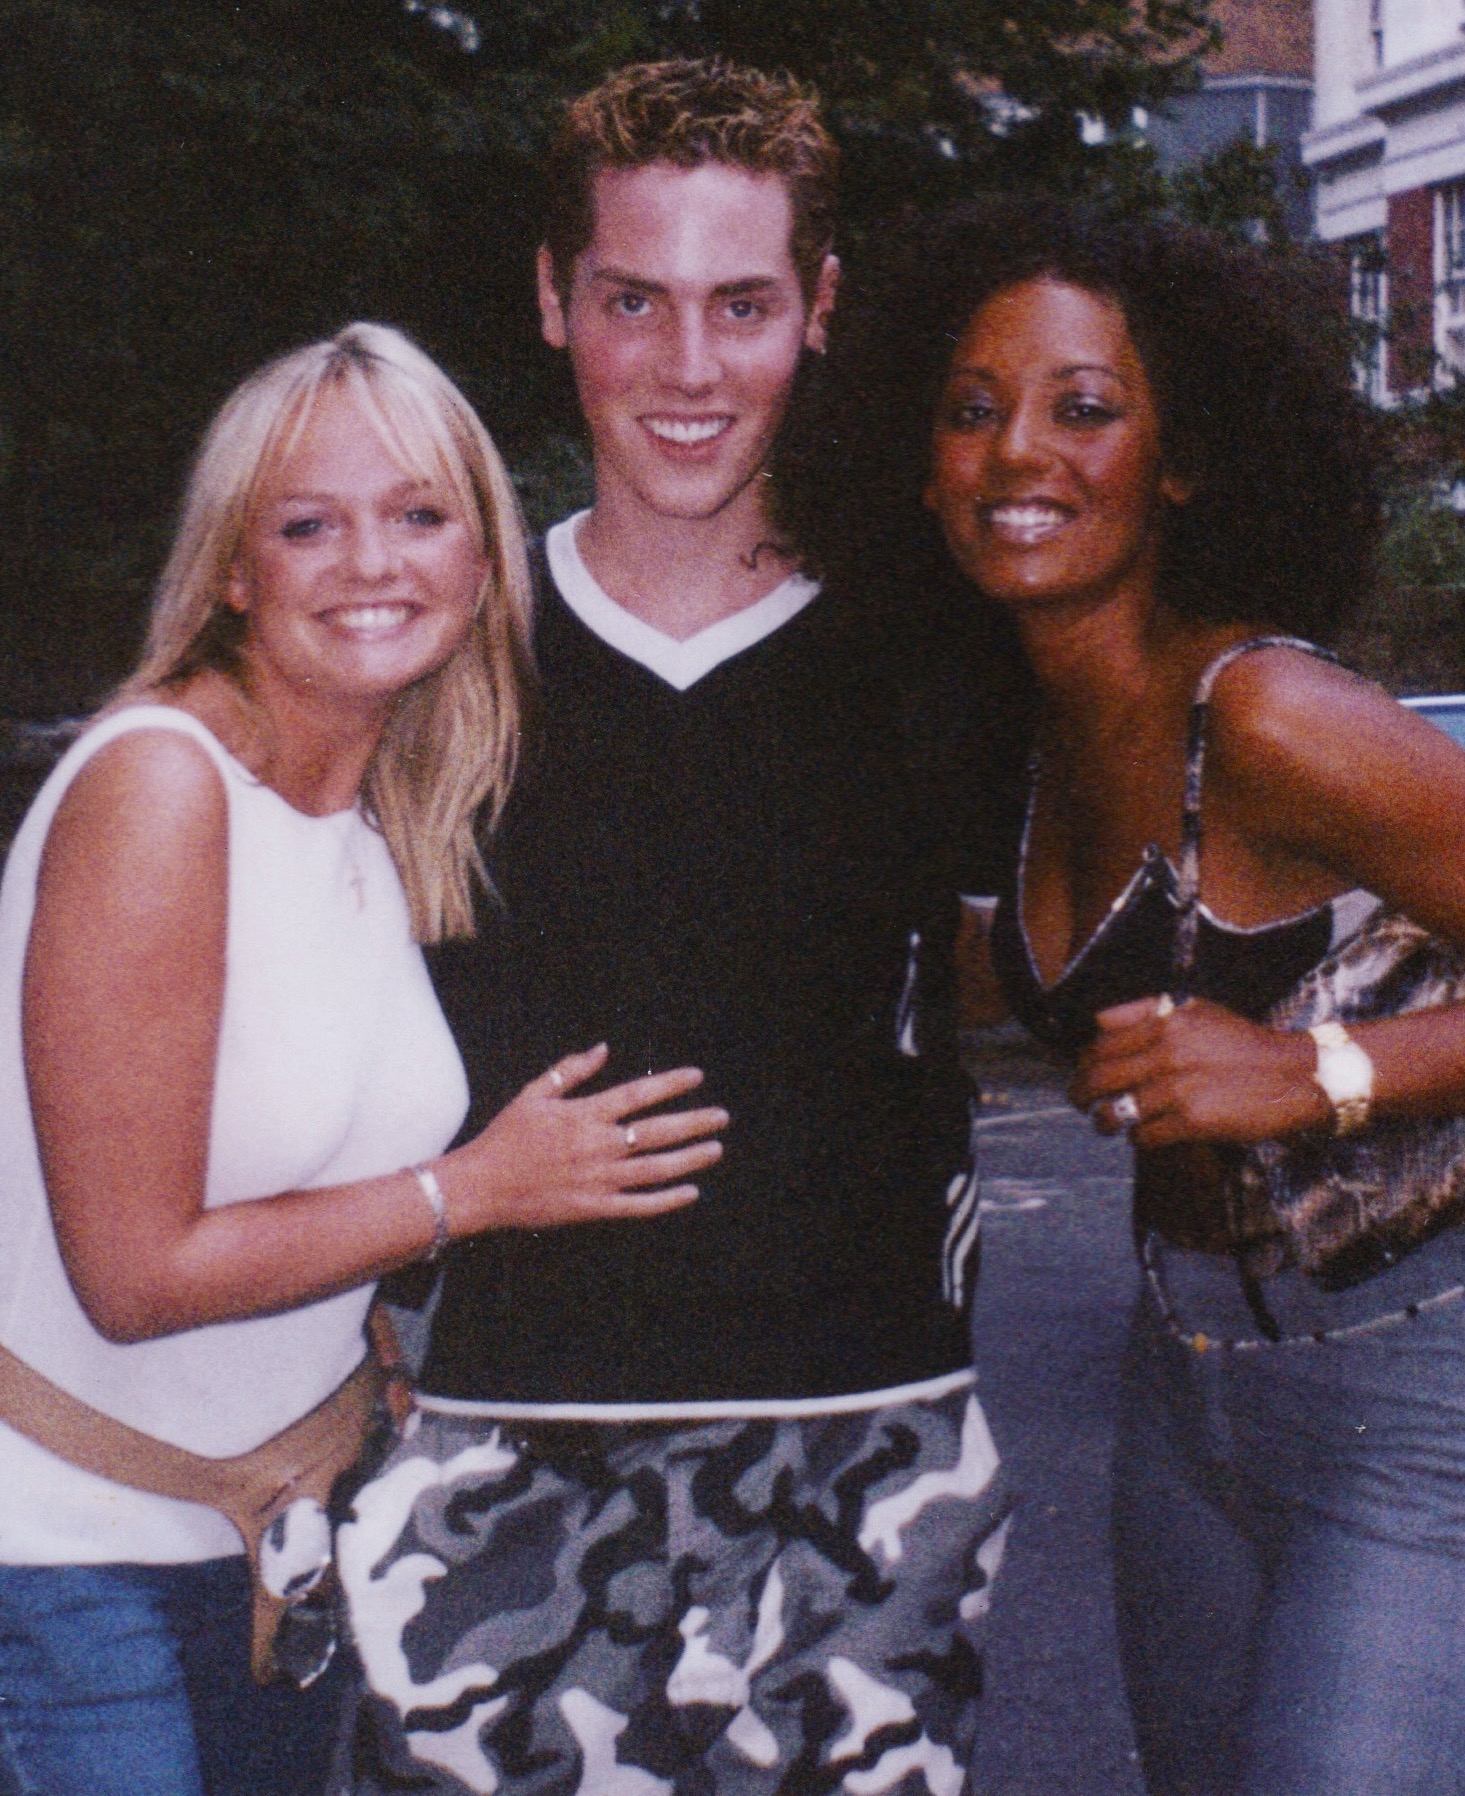 Emma Bunton and Mel B from the Spice Girls